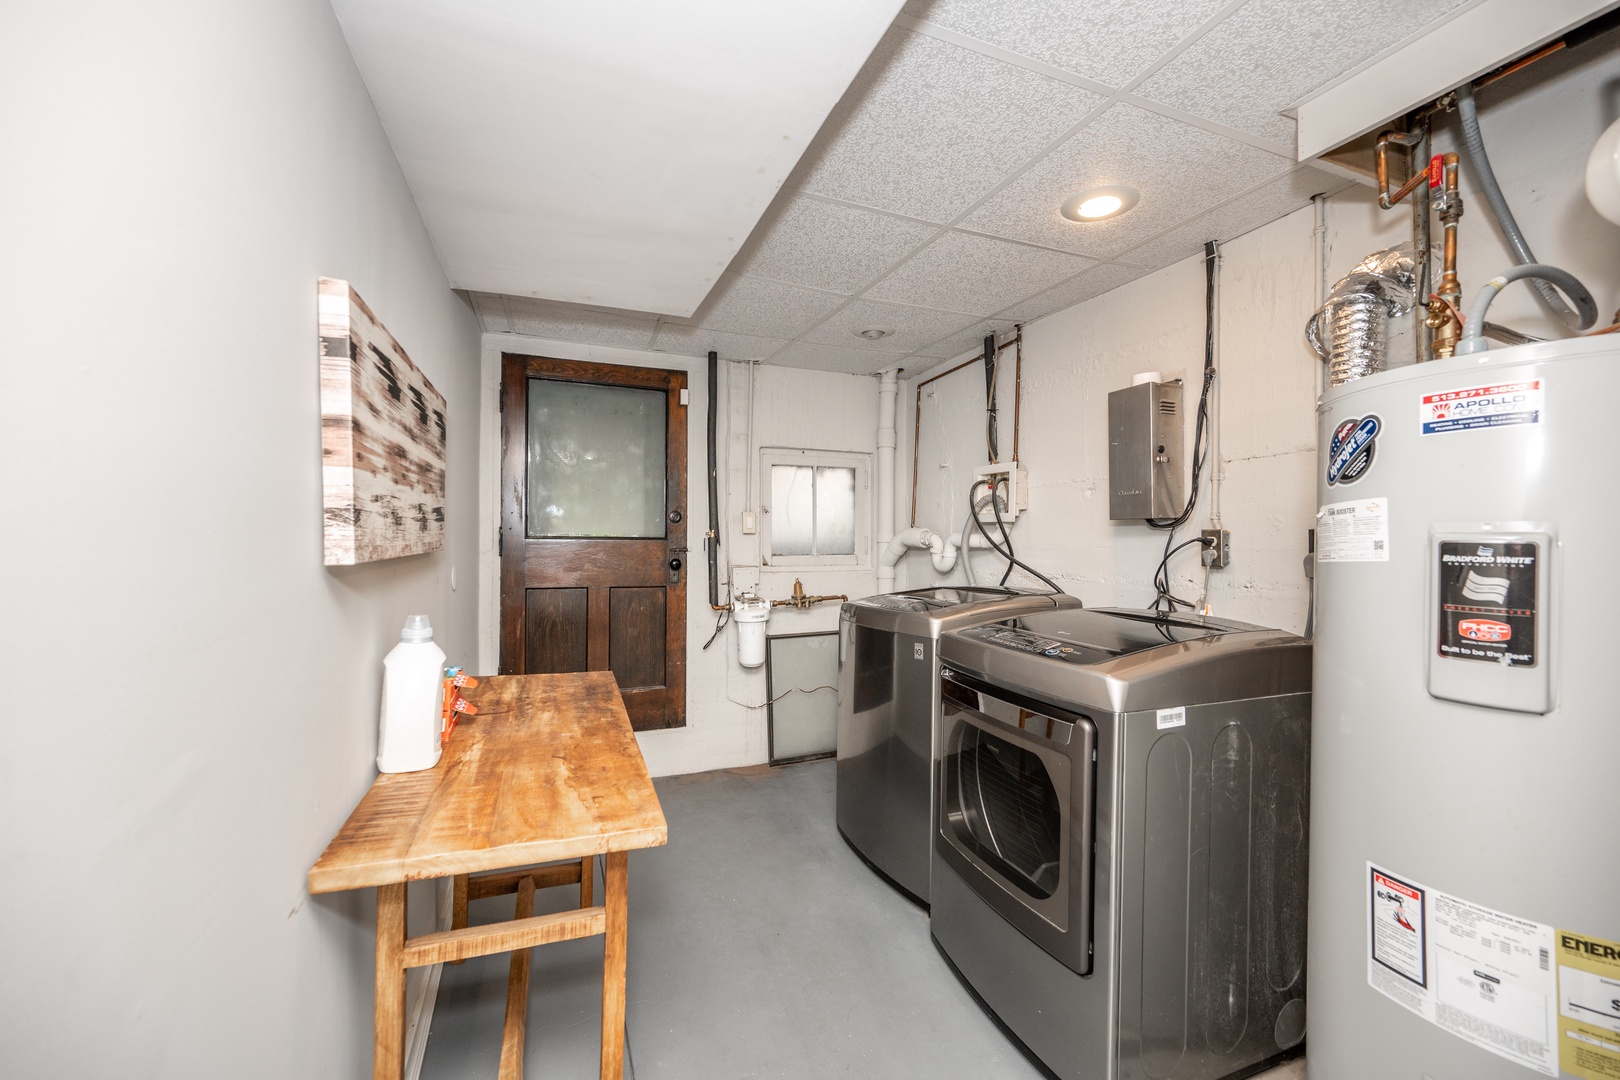 This home offers private laundry, located in the lower-level laundry room